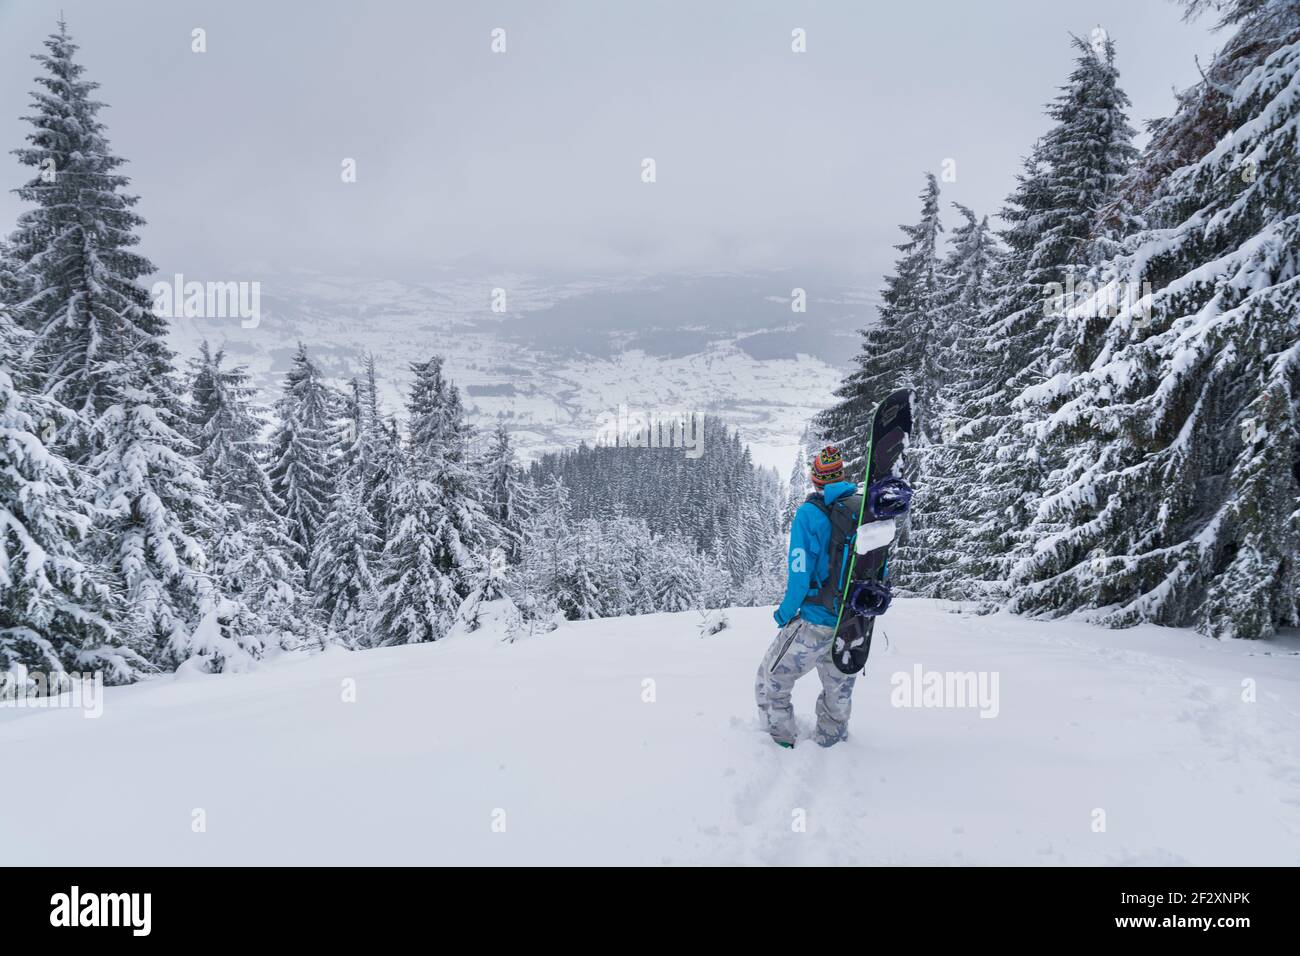 Snowboarder looking at landscape Stock Photo